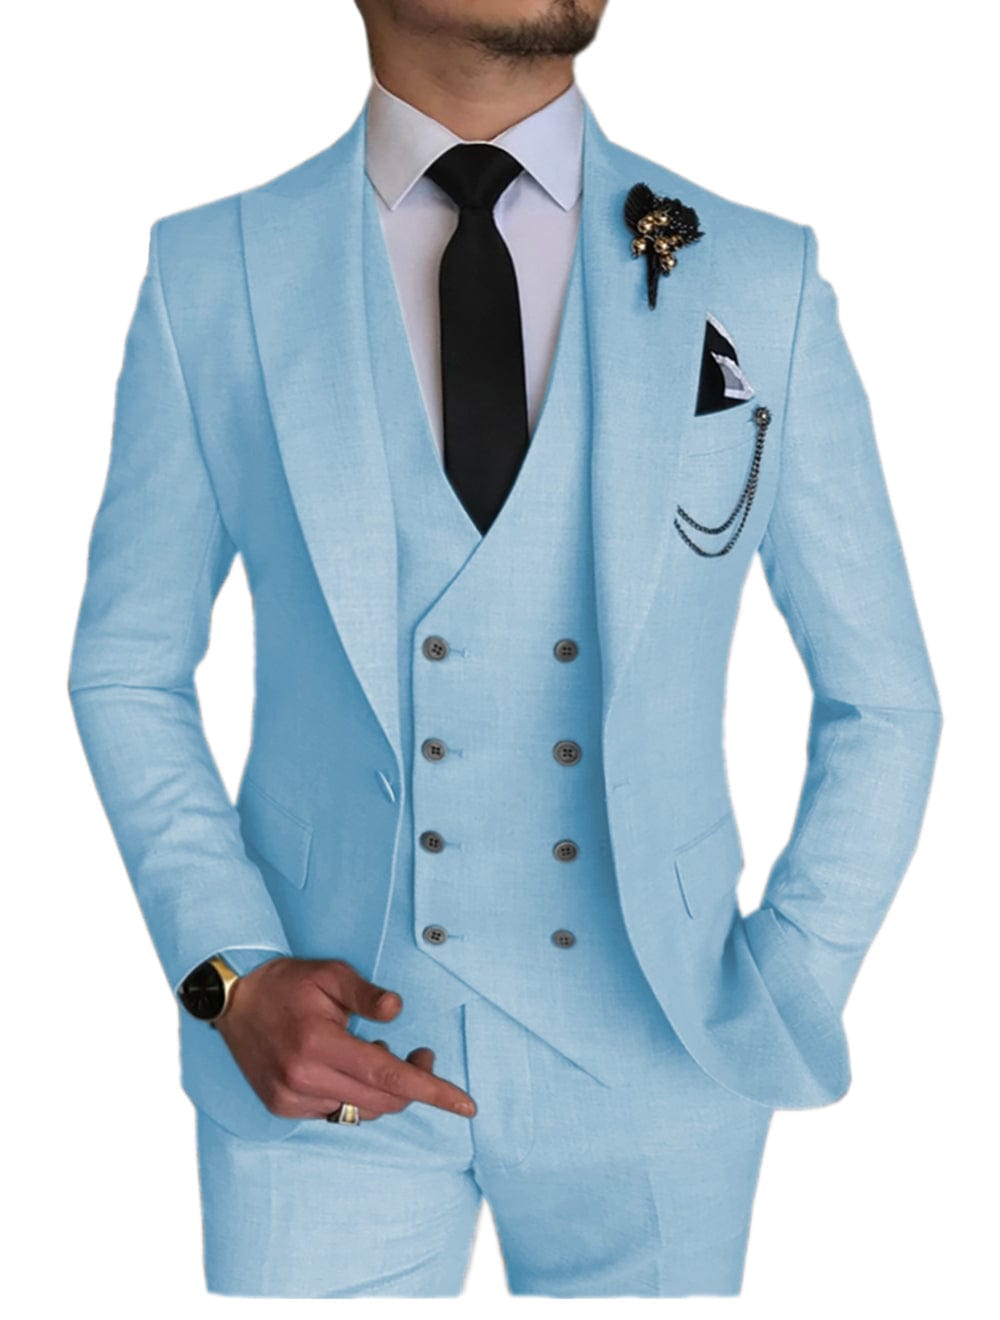 Lavender Slim Fit Purple Suit Men With Peaked Lapel Blazers, Vest, And  Pants Perfect For Weddings, Proms, Or Special Occasions From Weddingteam,  $85.94 | DHgate.Com